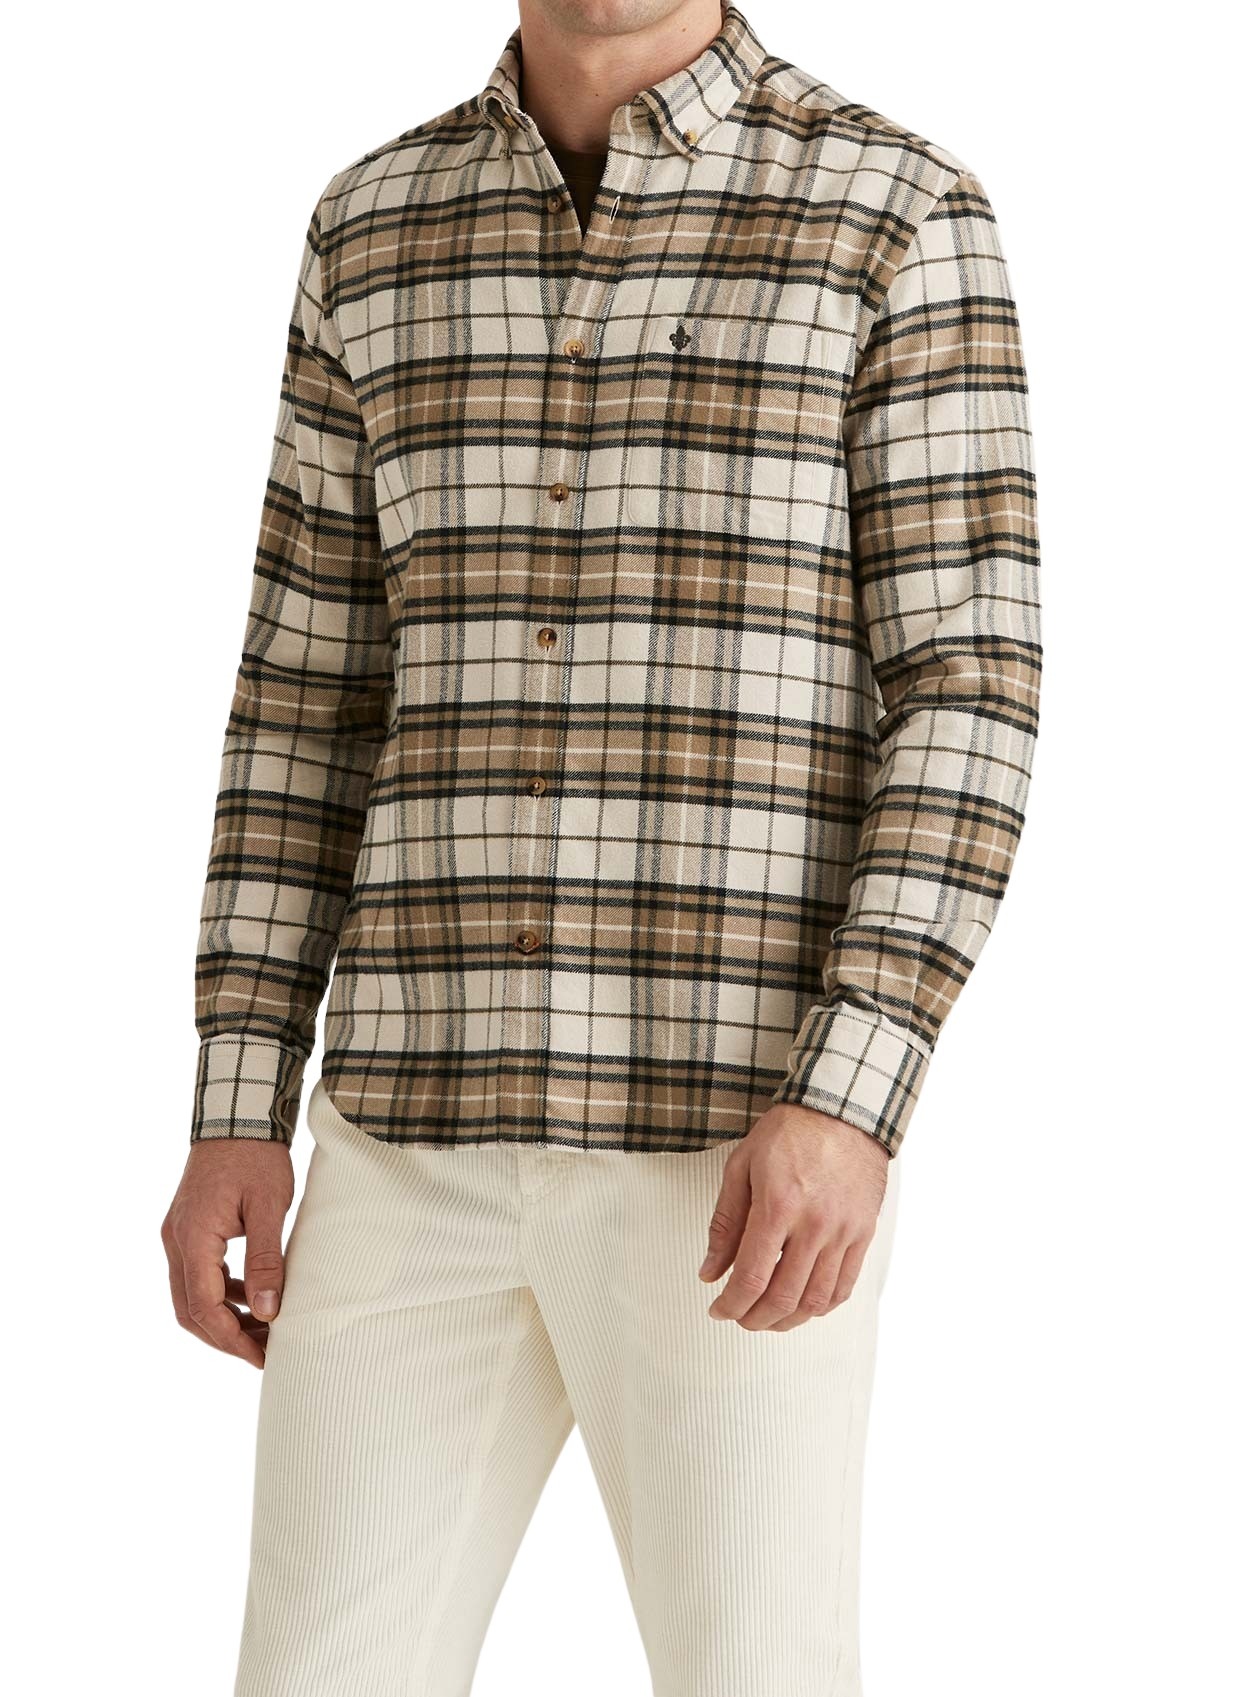 801640-flannel-big-check-shirt-classic-fit-02-off-white-extra